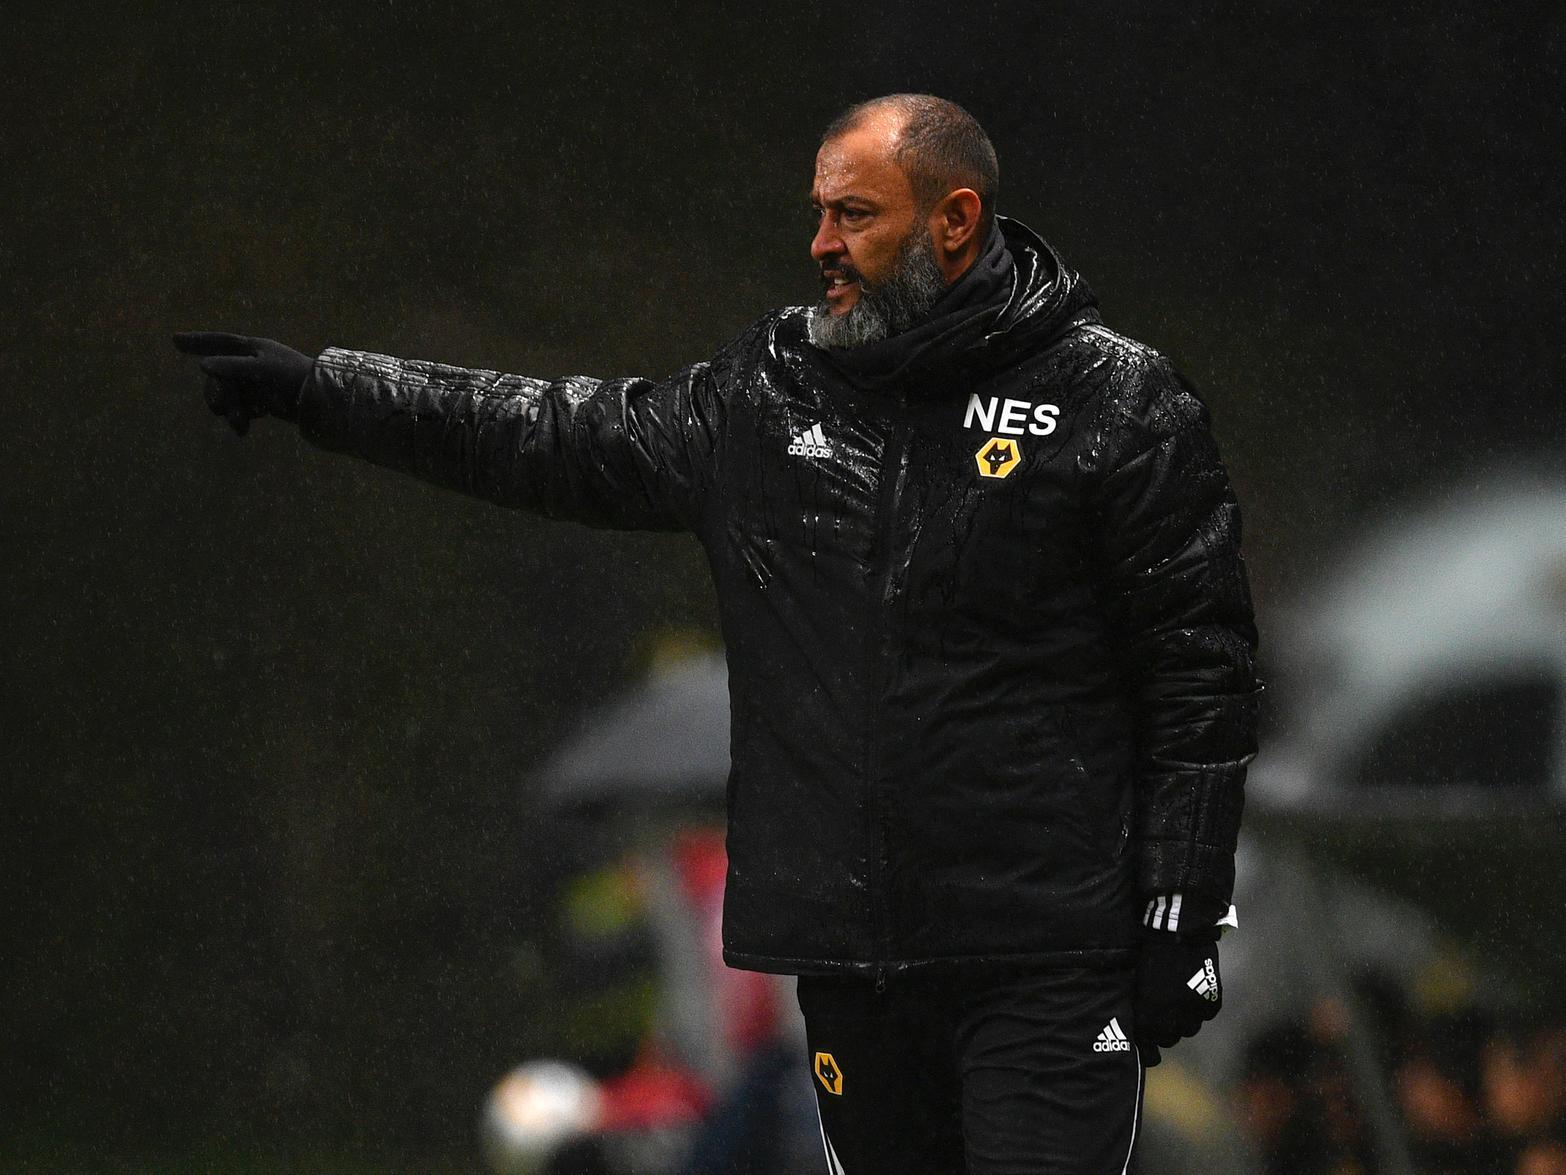 Wolves could be set to lose their manager Nuno Espirito Santo to Arsenal ahead of the game against Chris Wilders Sheffield United.